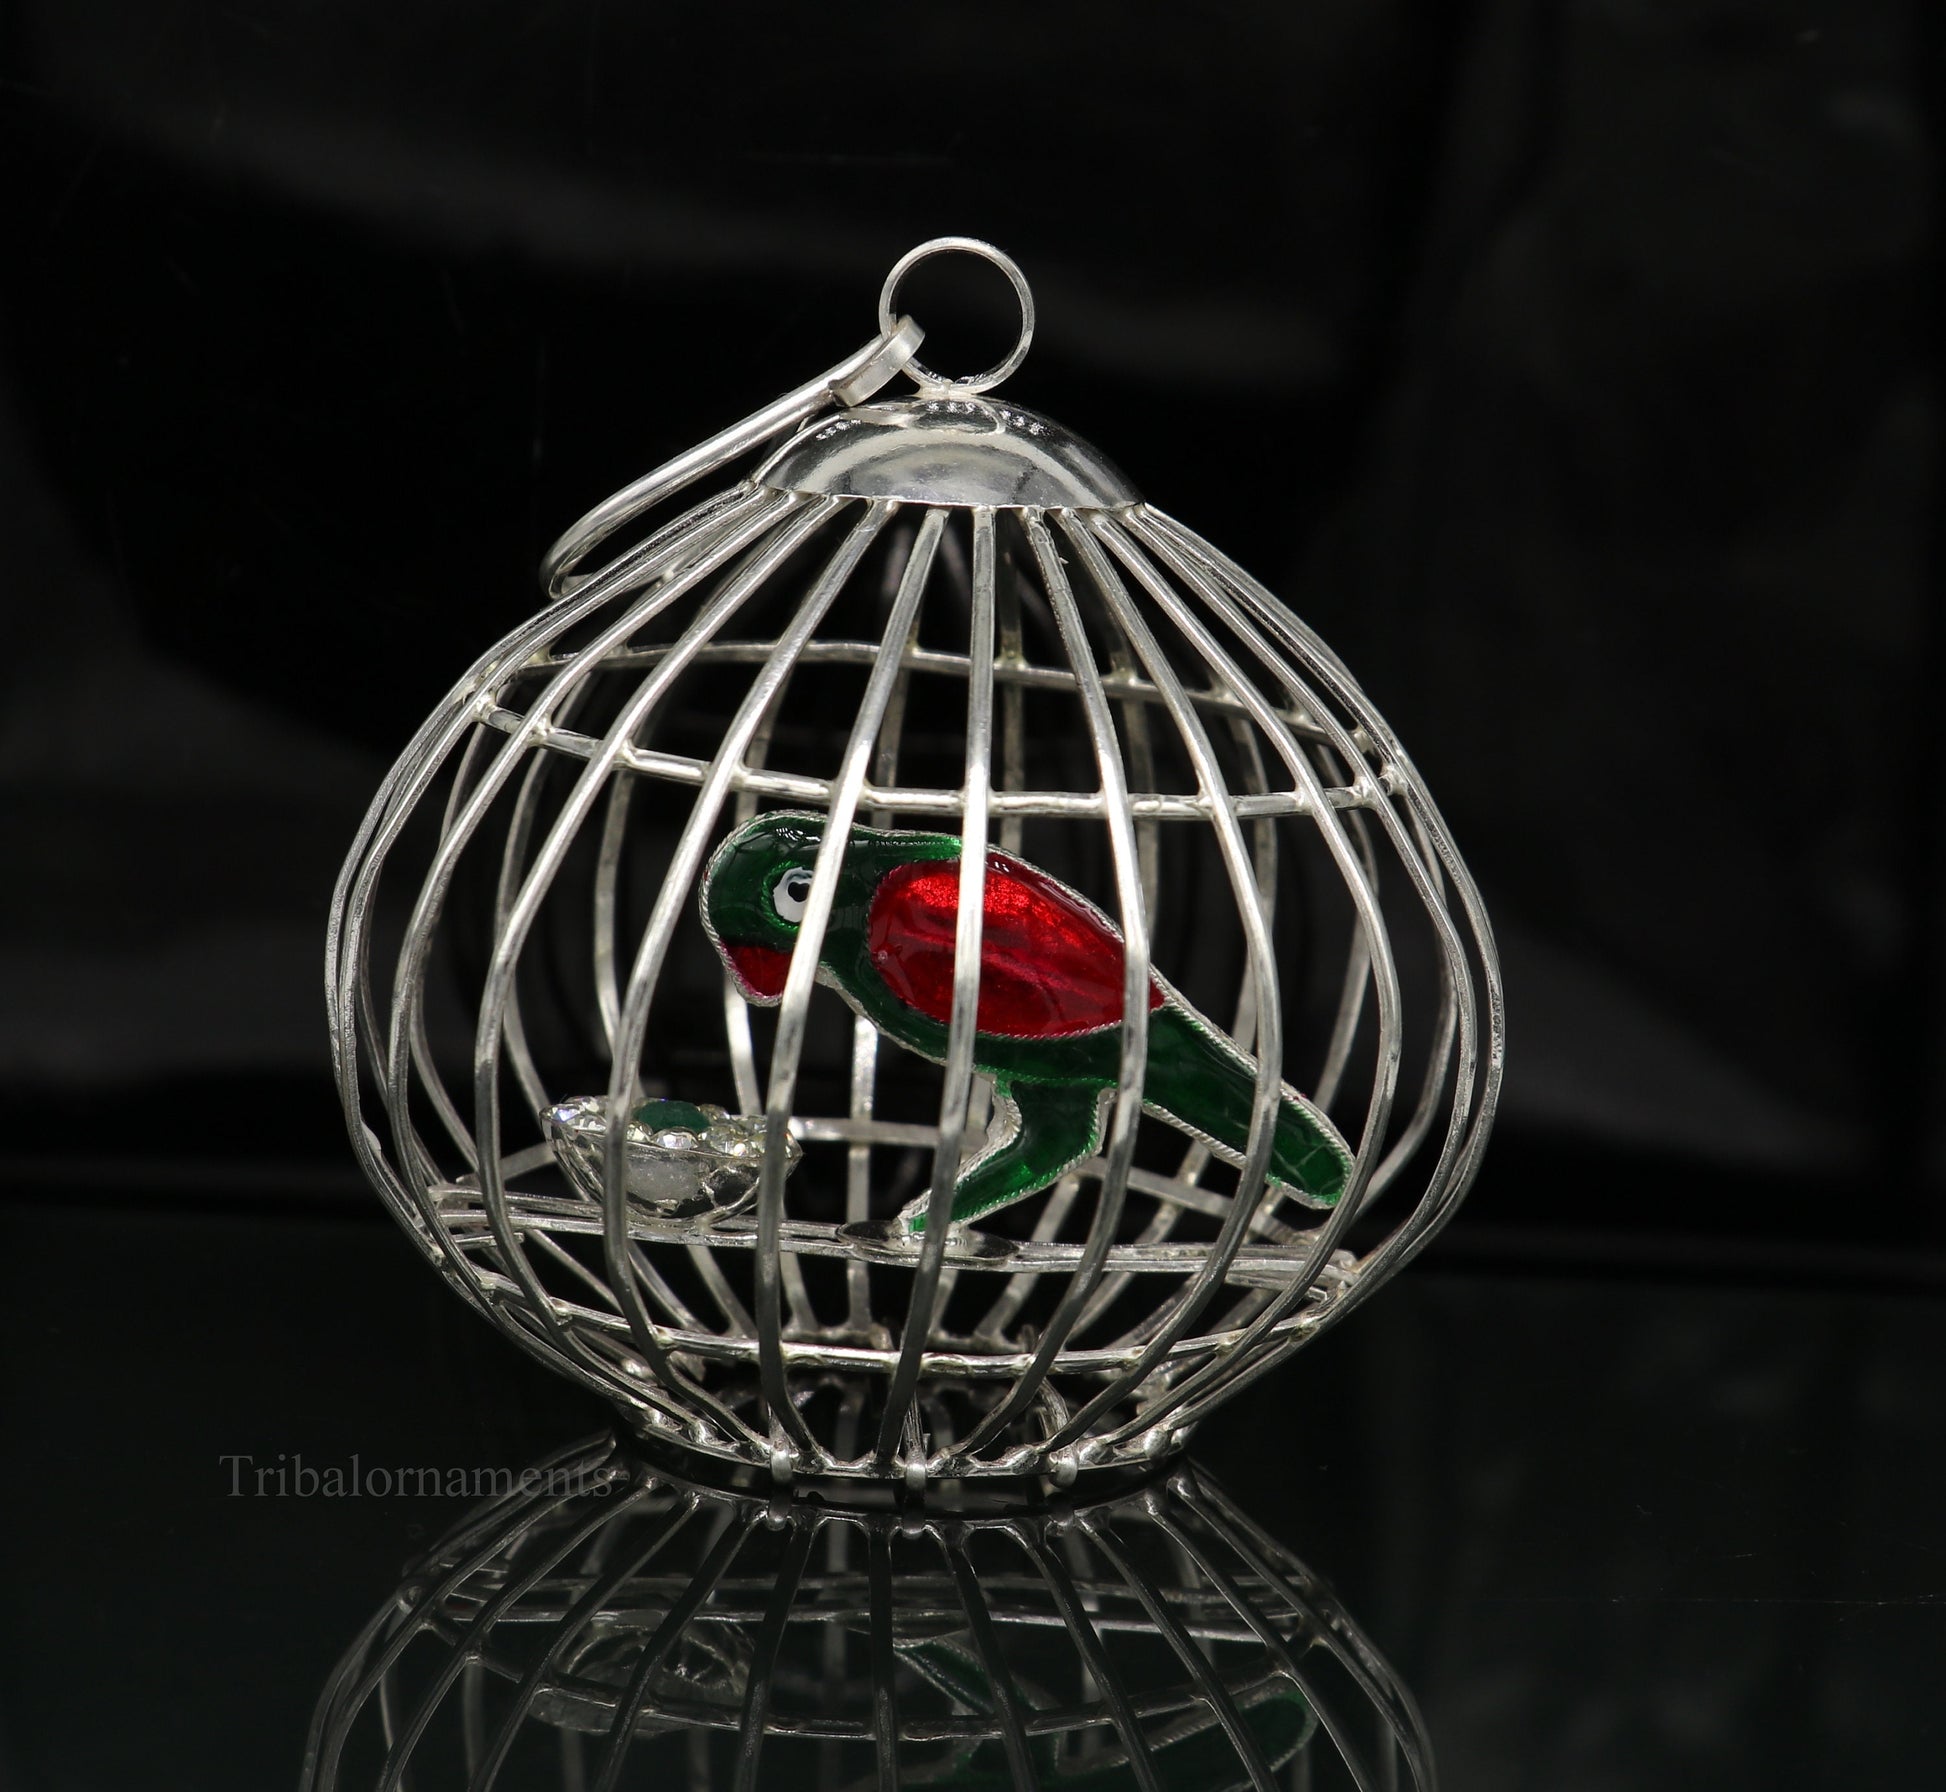 Solid sterling silver handmade toy for idlo krishna, silver parrot with cage, silver article for gifting to God or idol Krishna,  su444 - TRIBAL ORNAMENTS